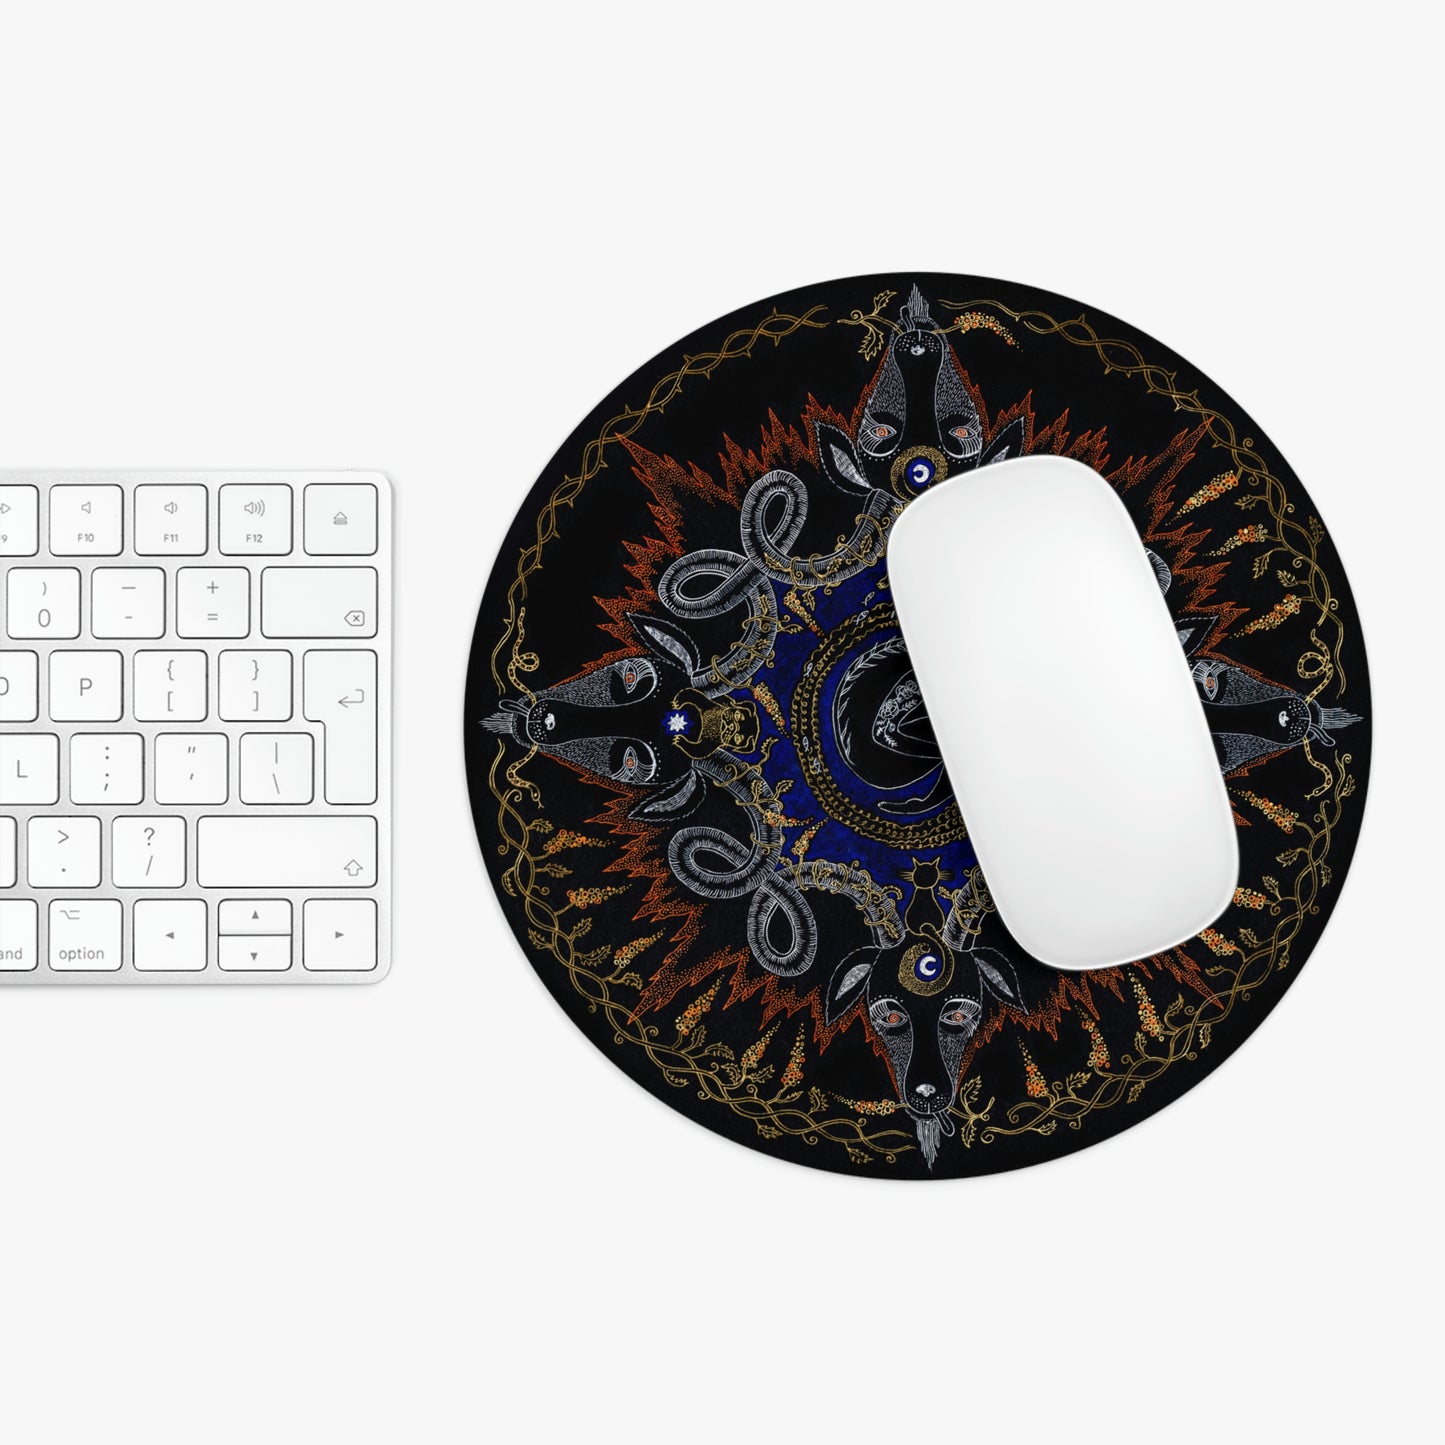 Chinese Zodiac Sign Mouse Pad (Goat)